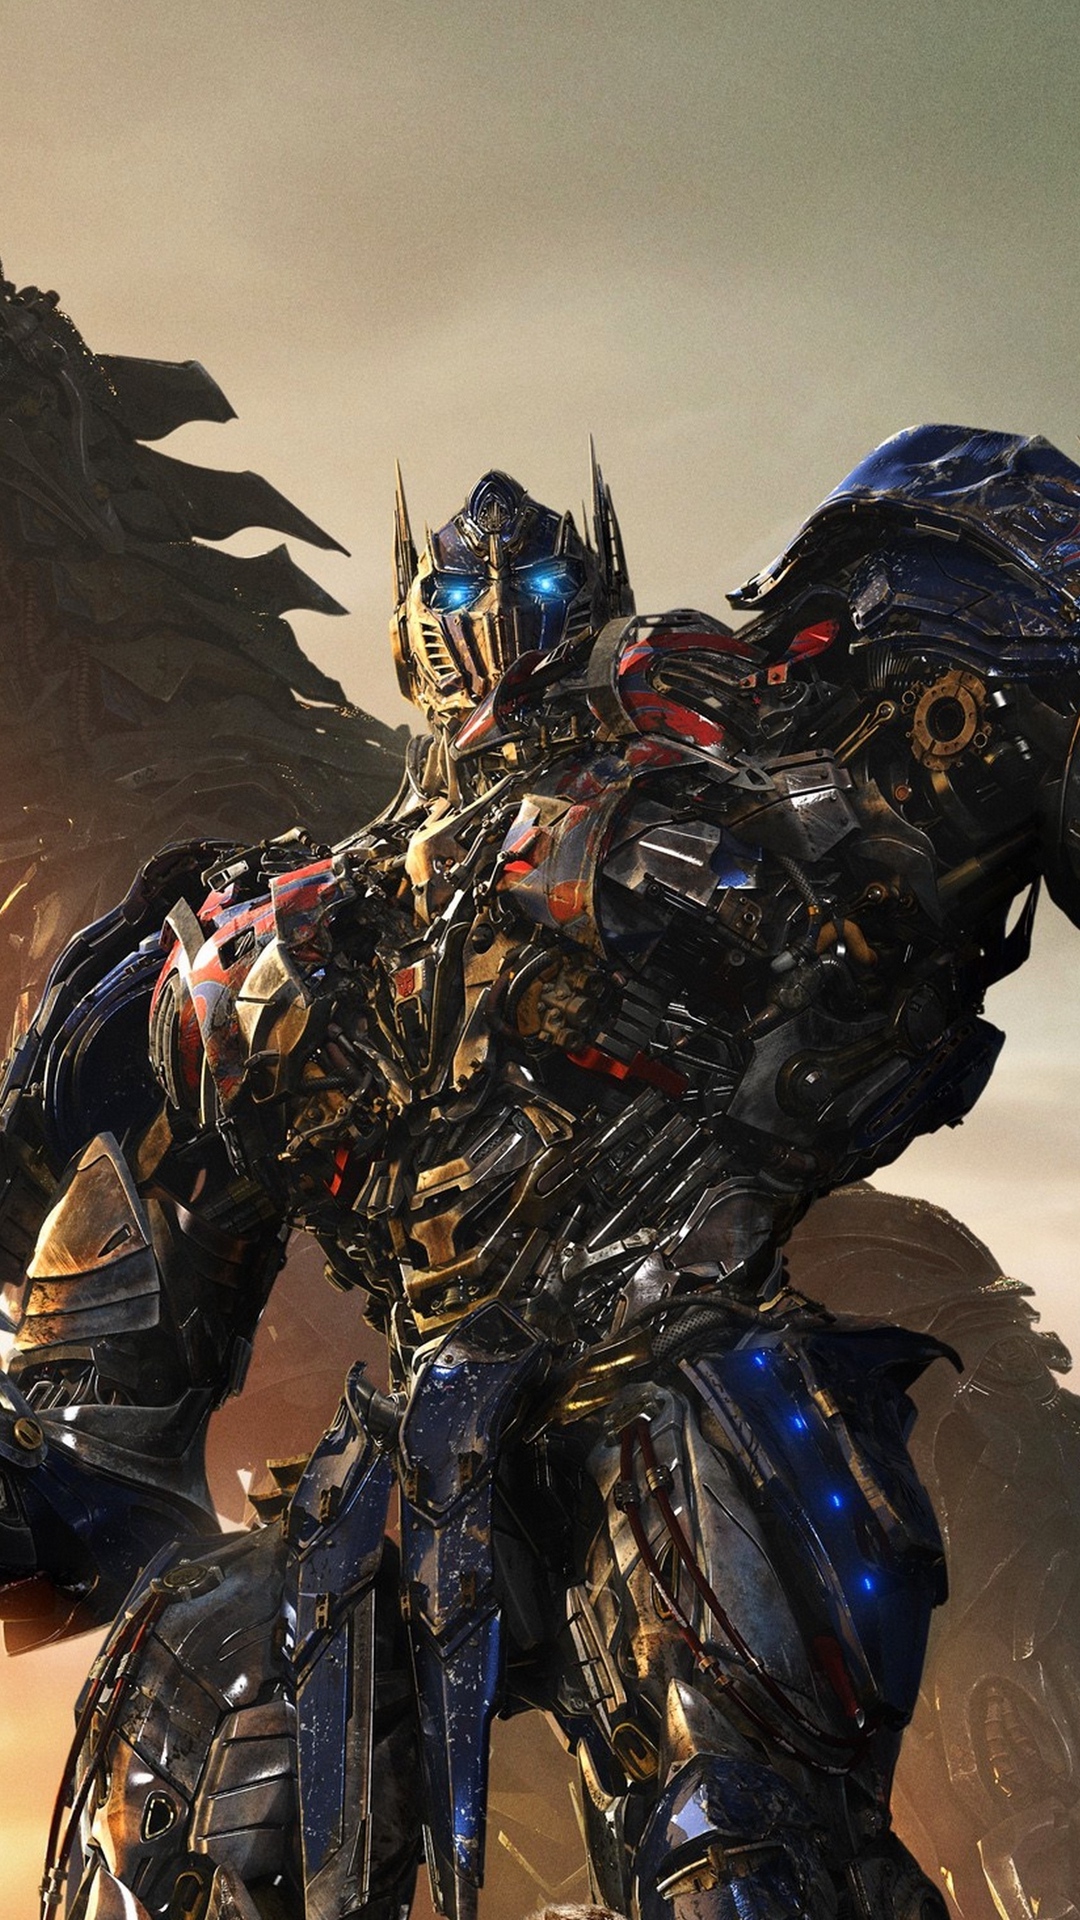 Wallpaper Transformers Age Of Extinction, Optimus Prime, - Optimus Prime Wallpaper 4k Iphone - HD Wallpaper 